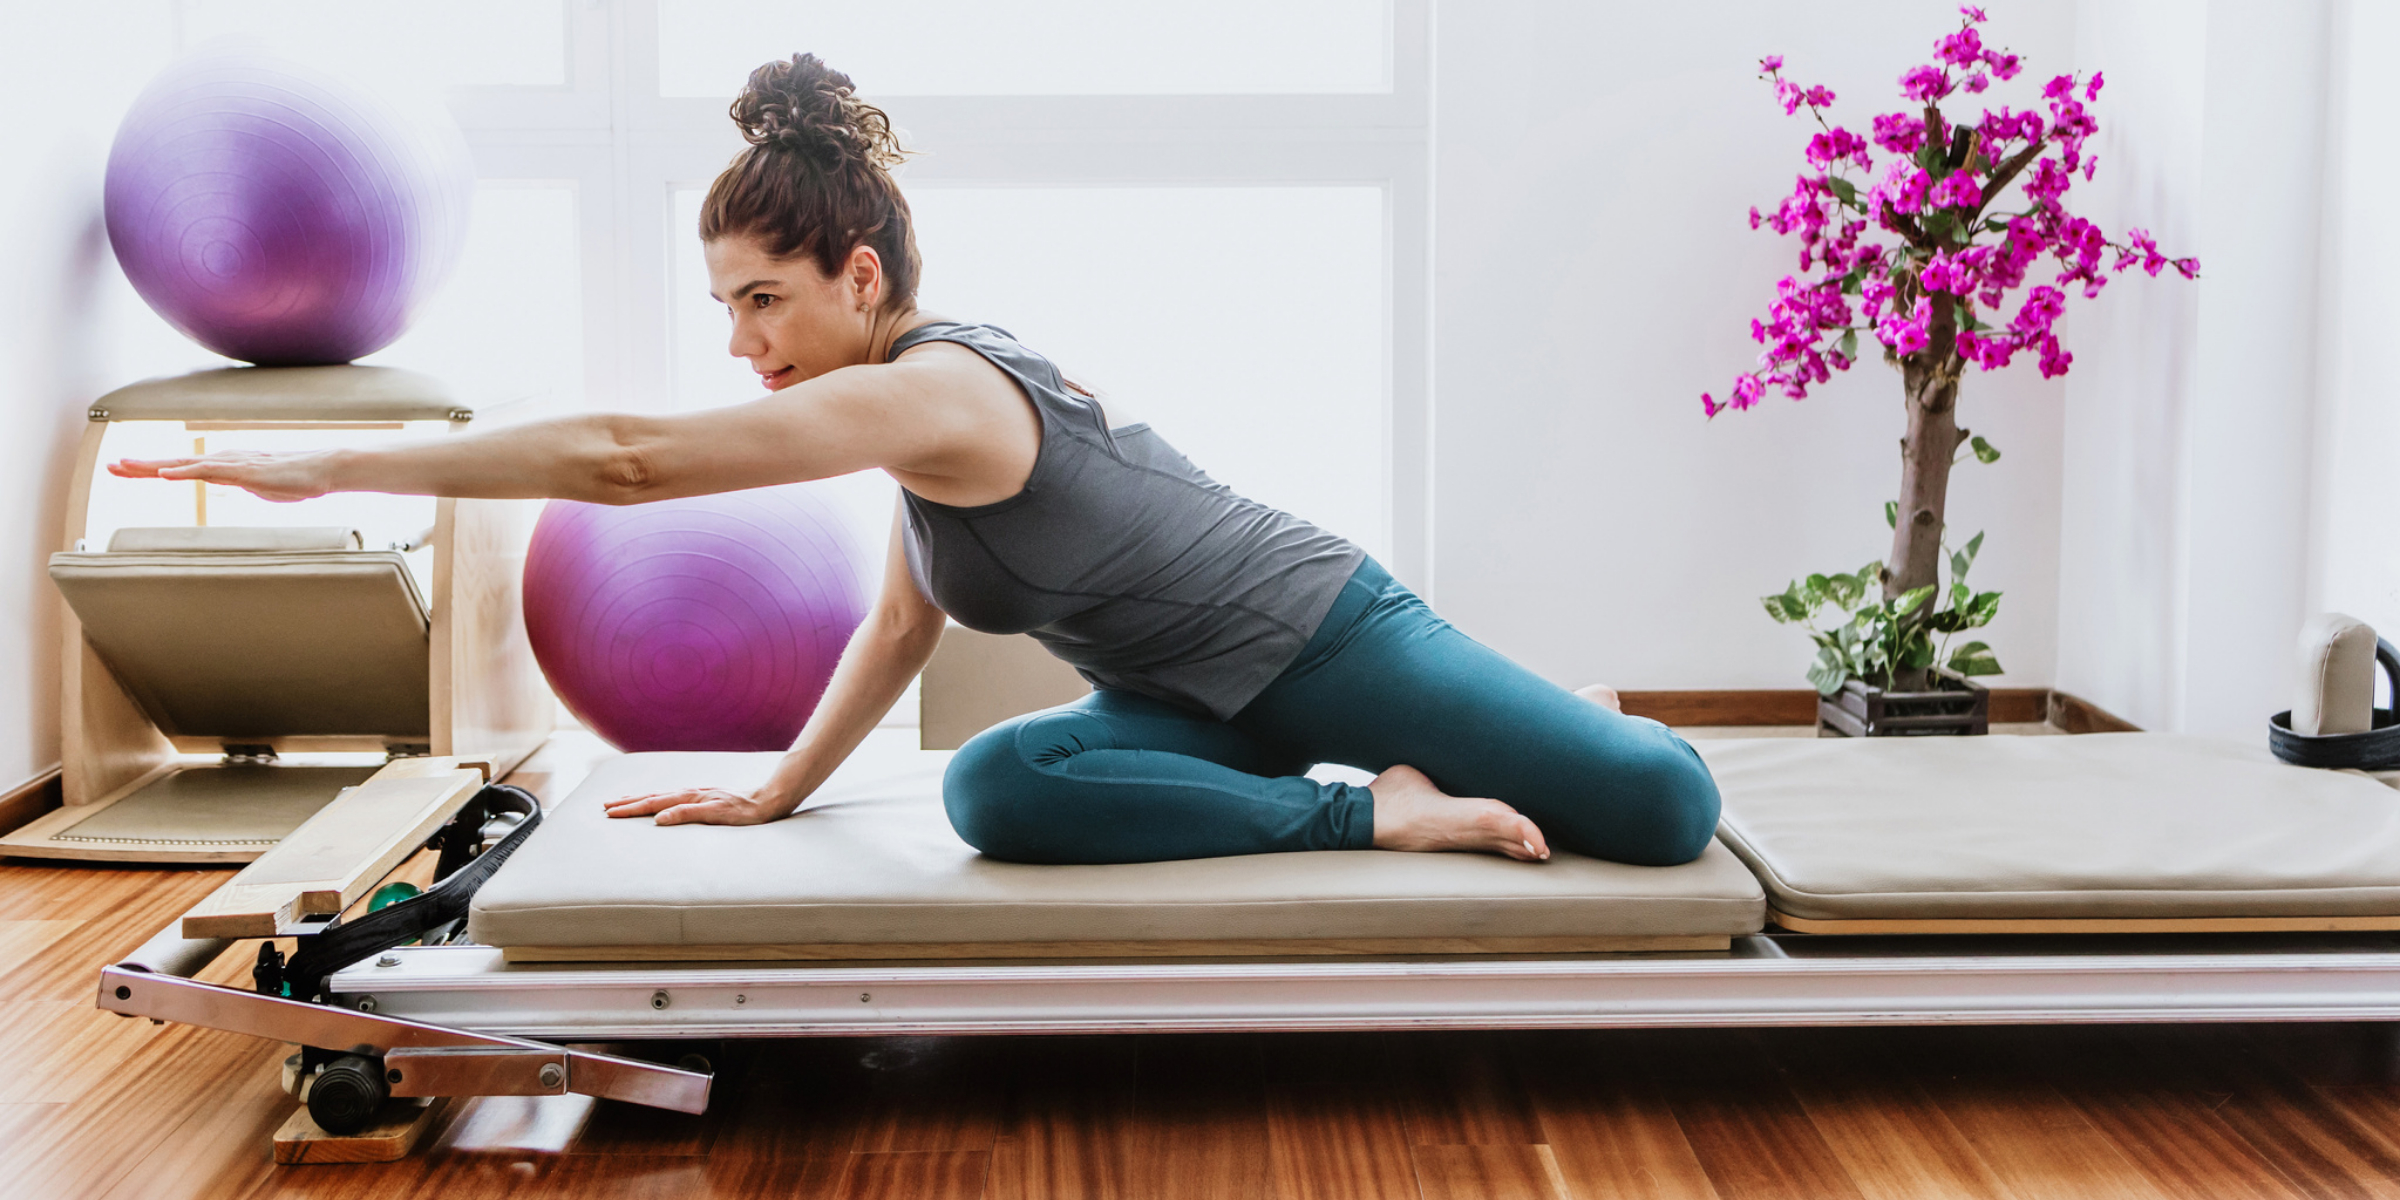 A woman doing pilates on a pilates reformer.